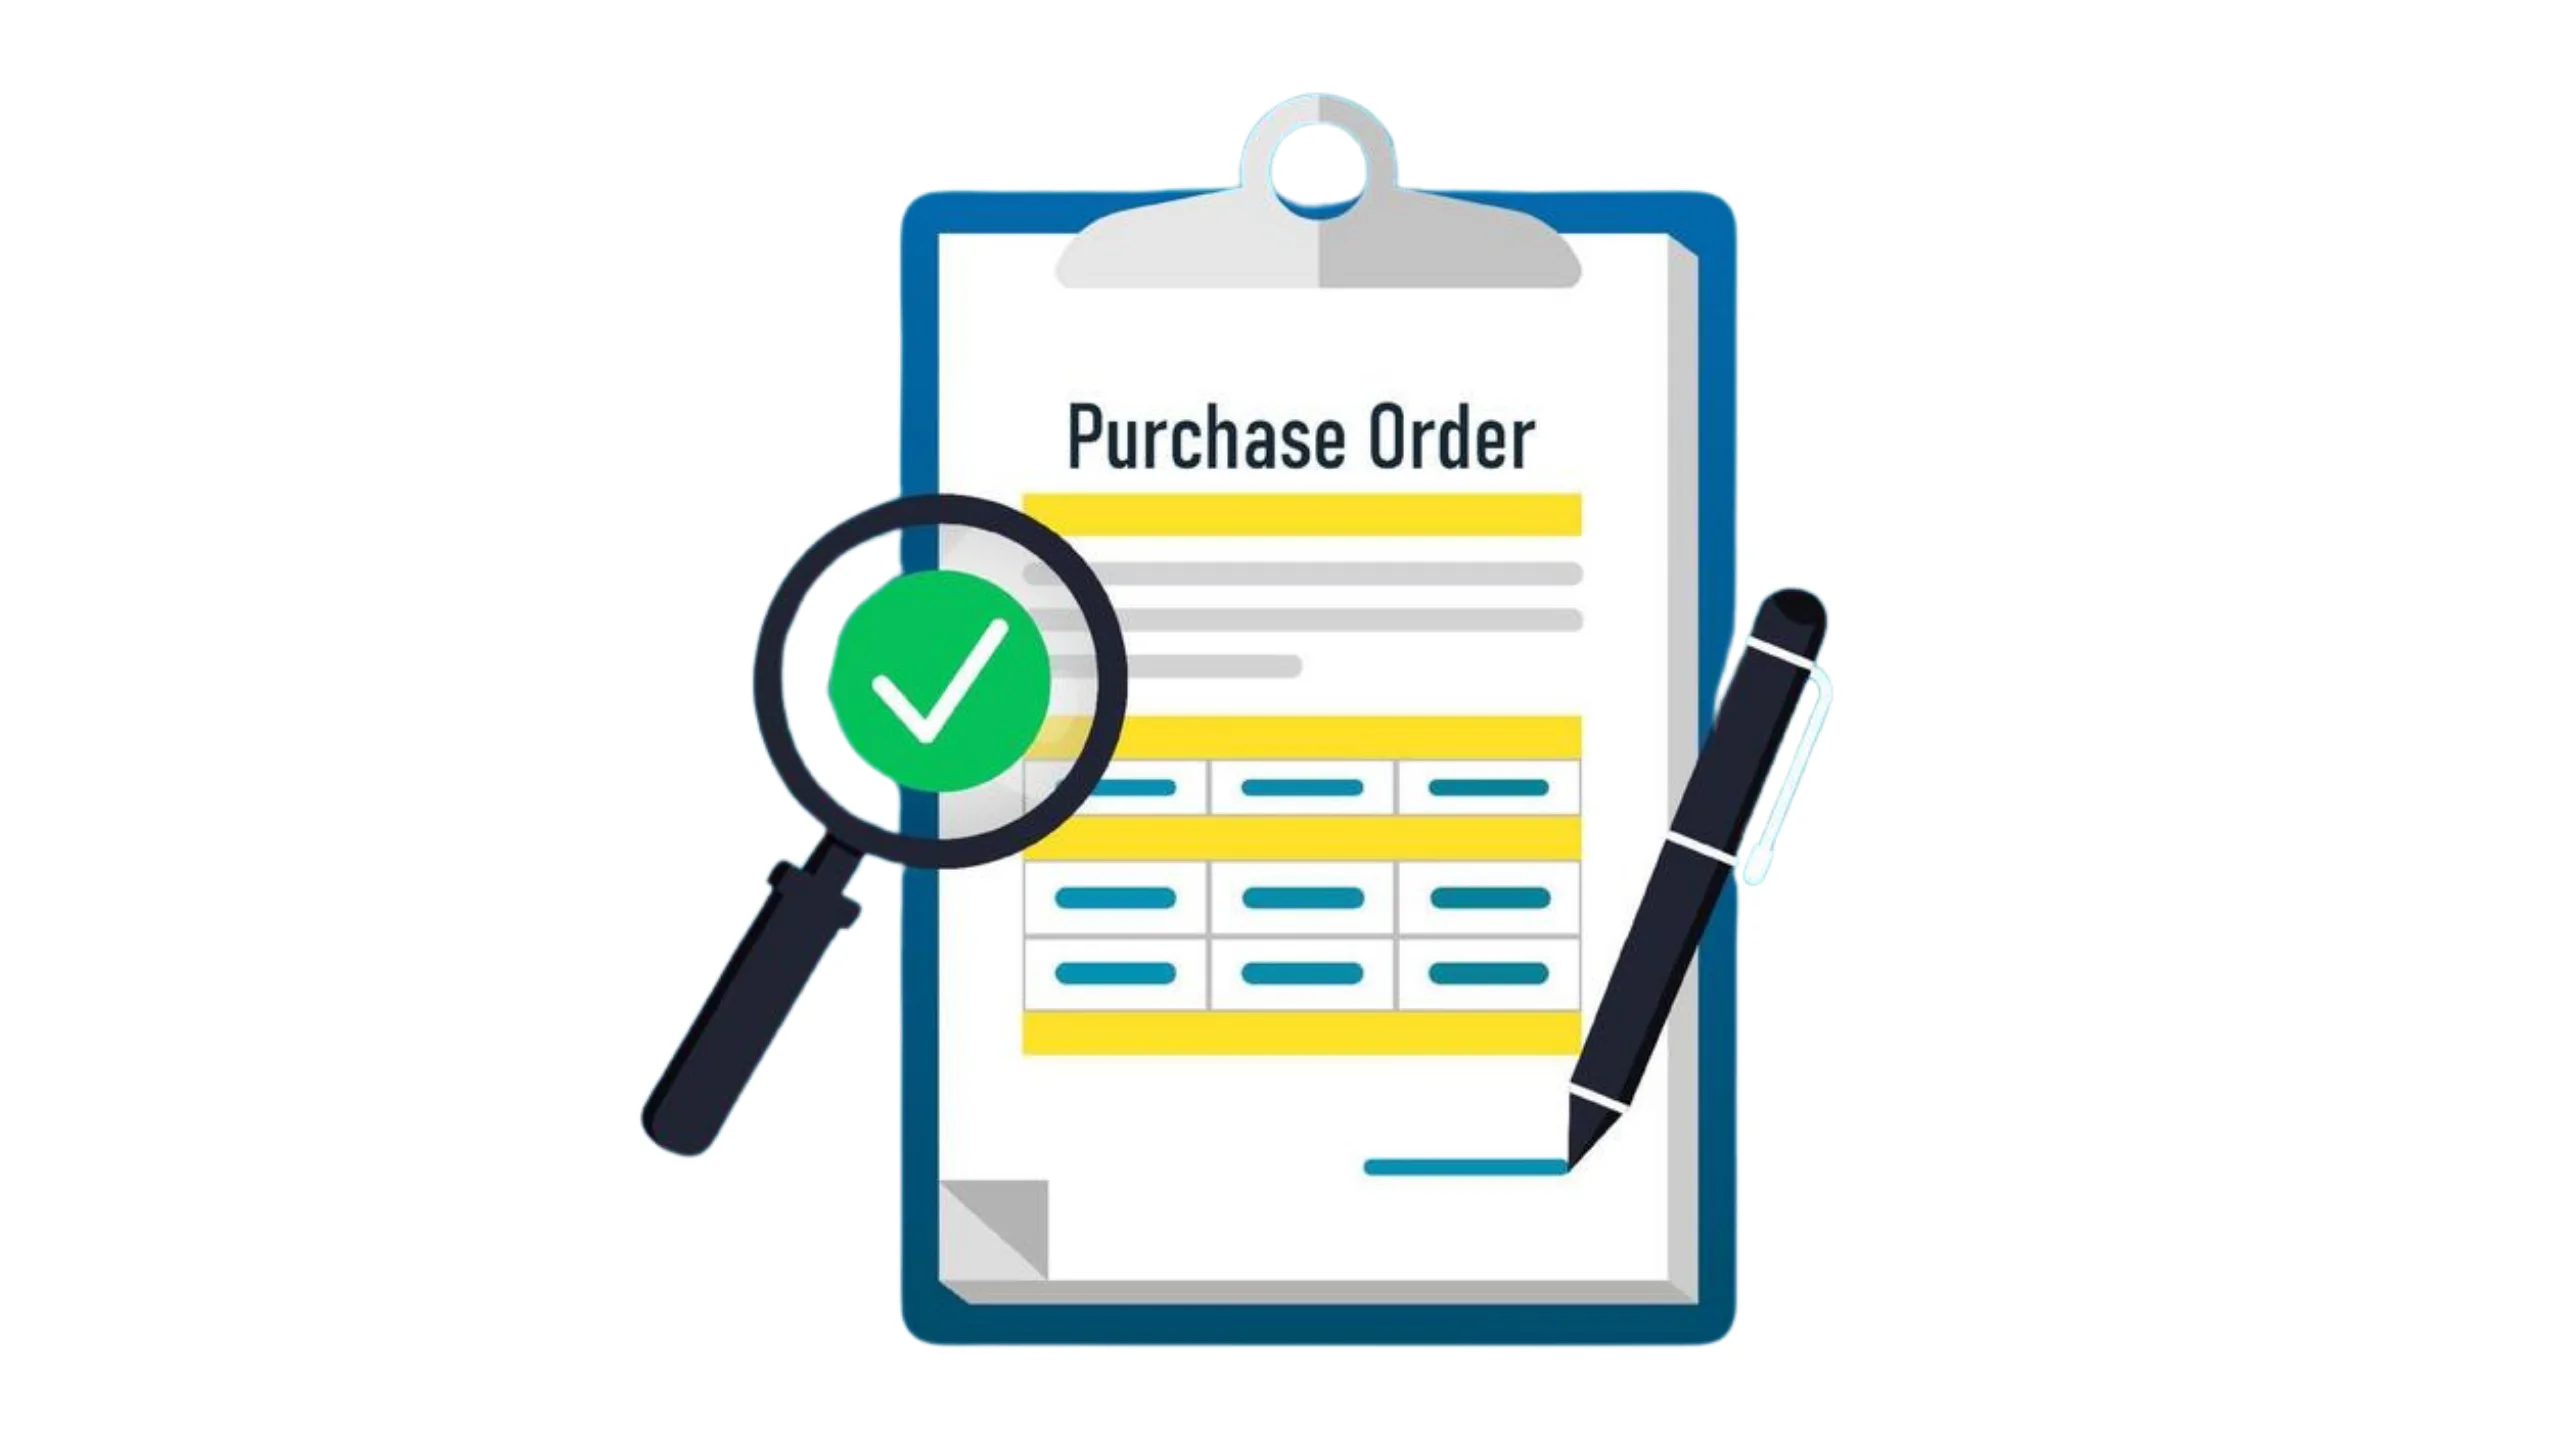 A purchase order (PO) is a commercial document issued by a buyer to a seller, indicating the types, quantities, and agreed prices for products or services that the seller will provide to the buyer.